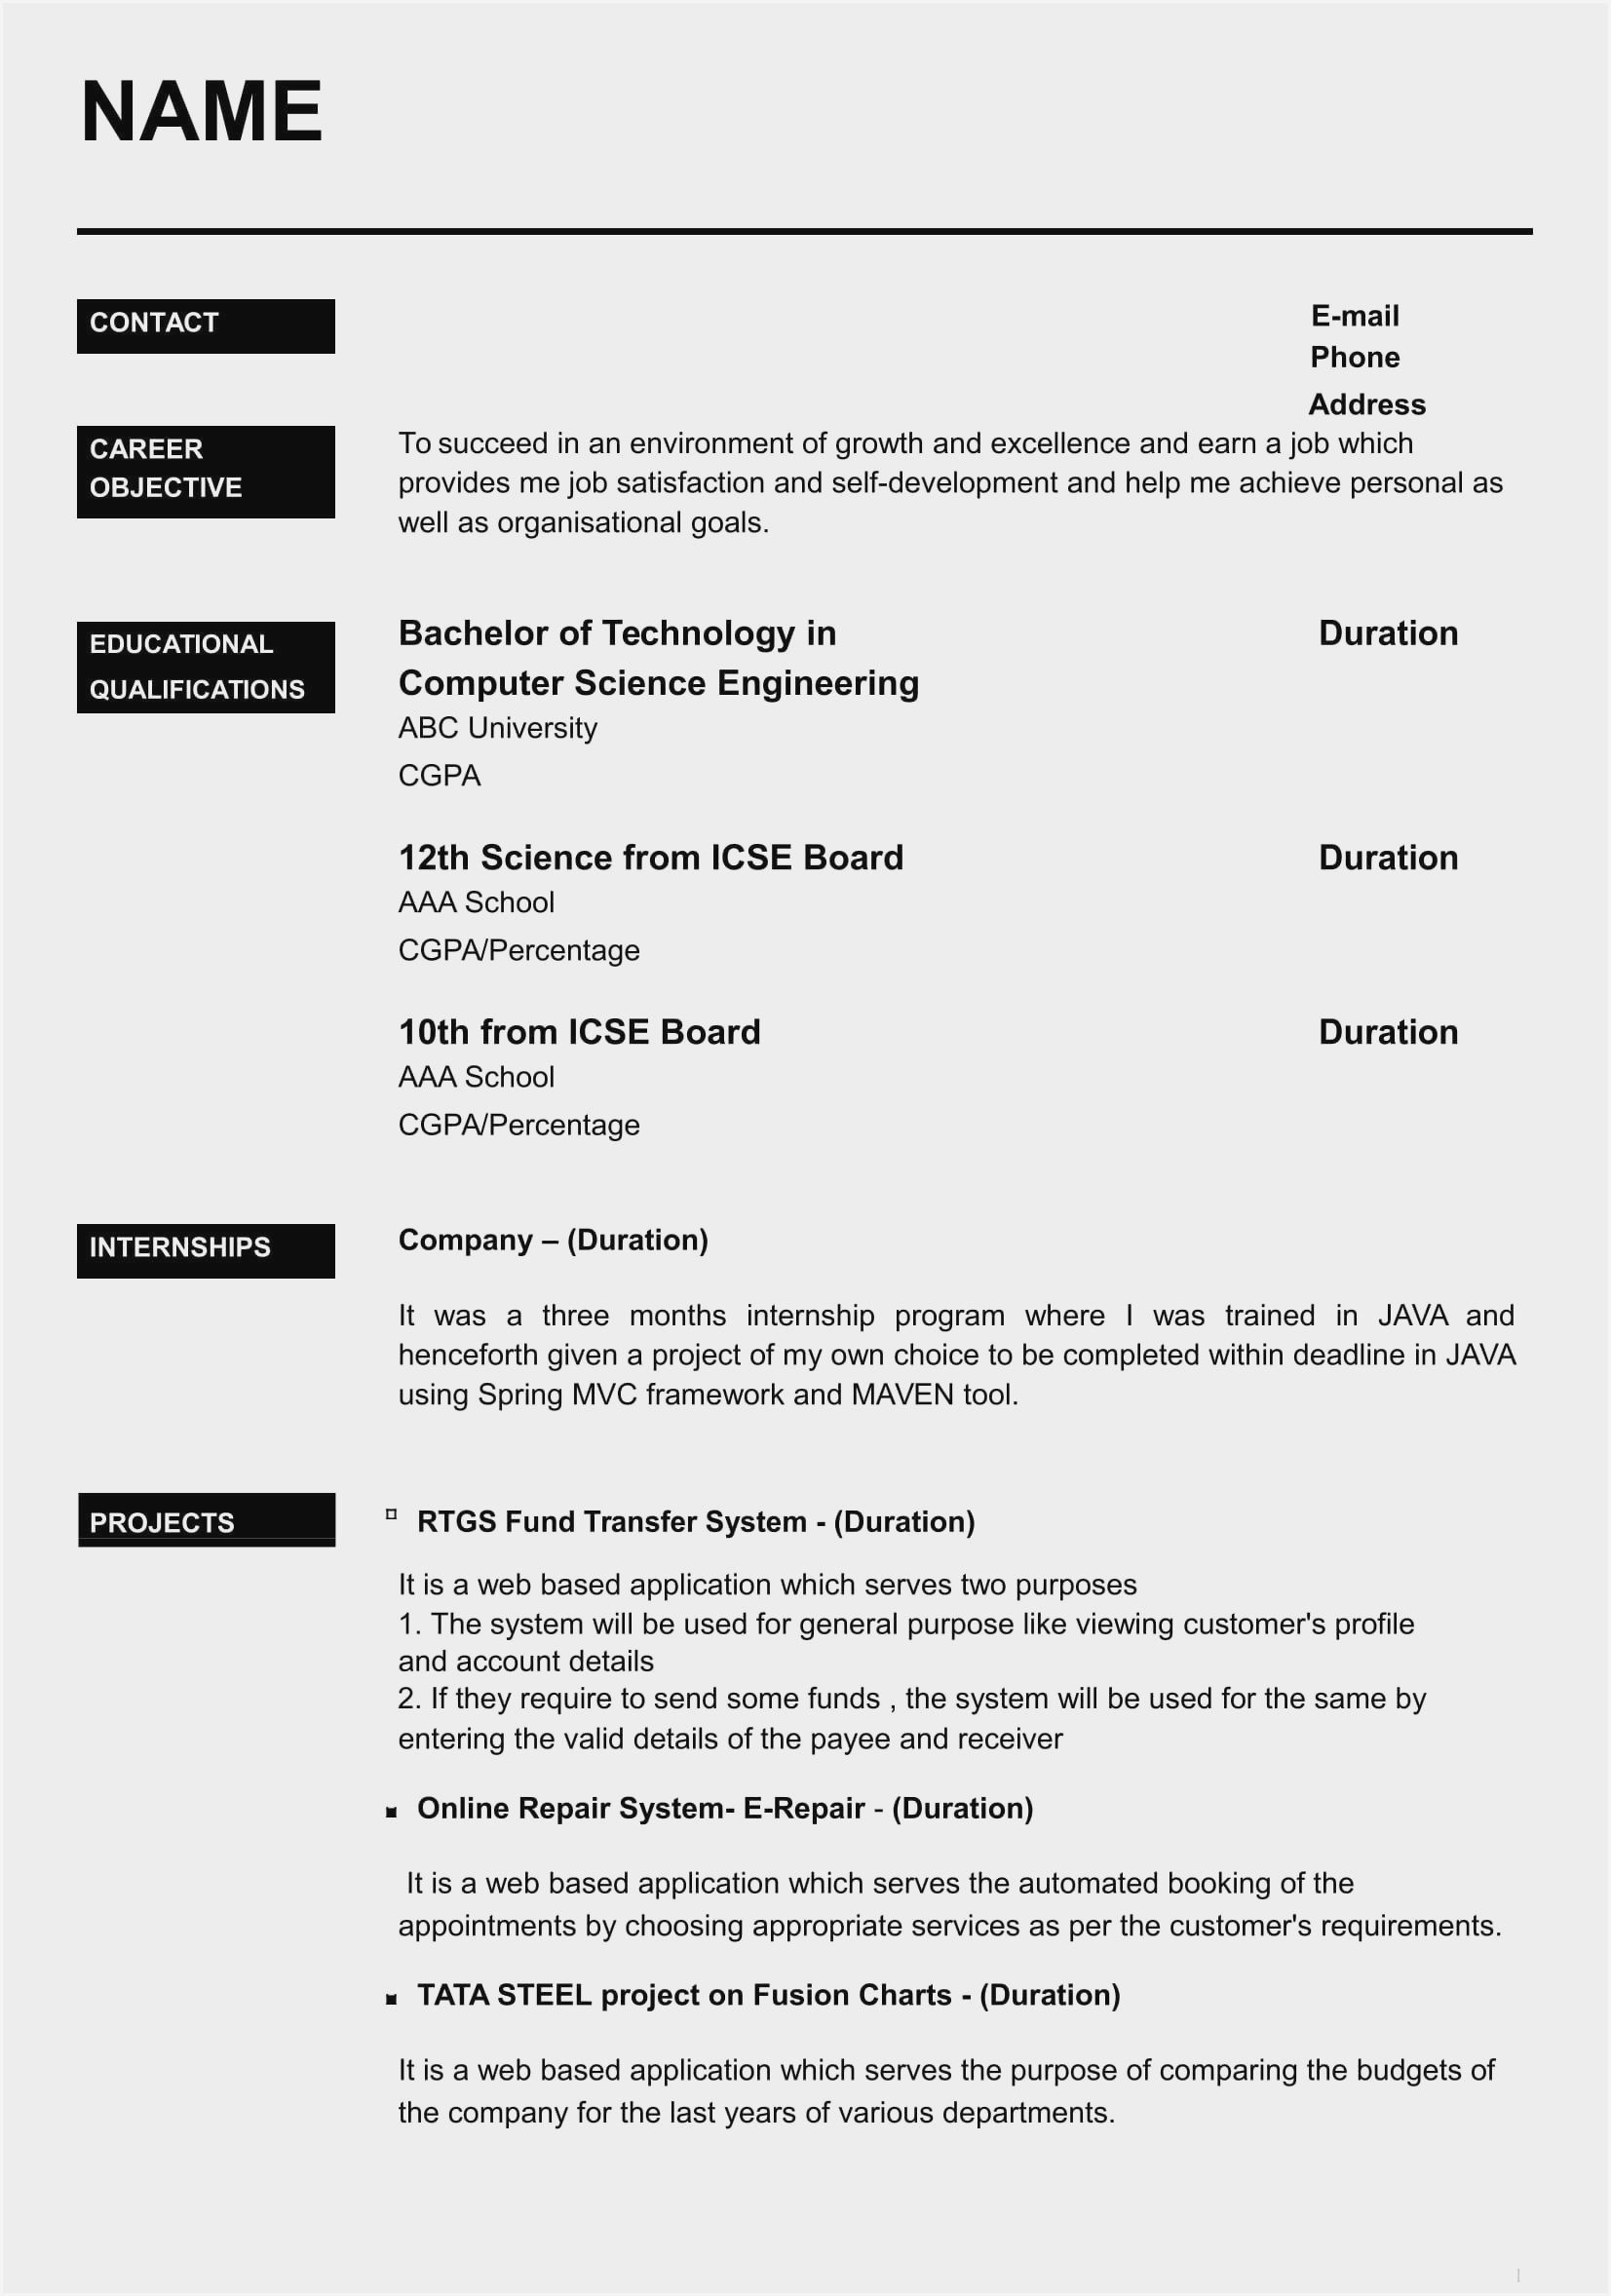 Resume Samples for Freshers Engineers India Resume format Pdf Download for Freshers India Job Resume …